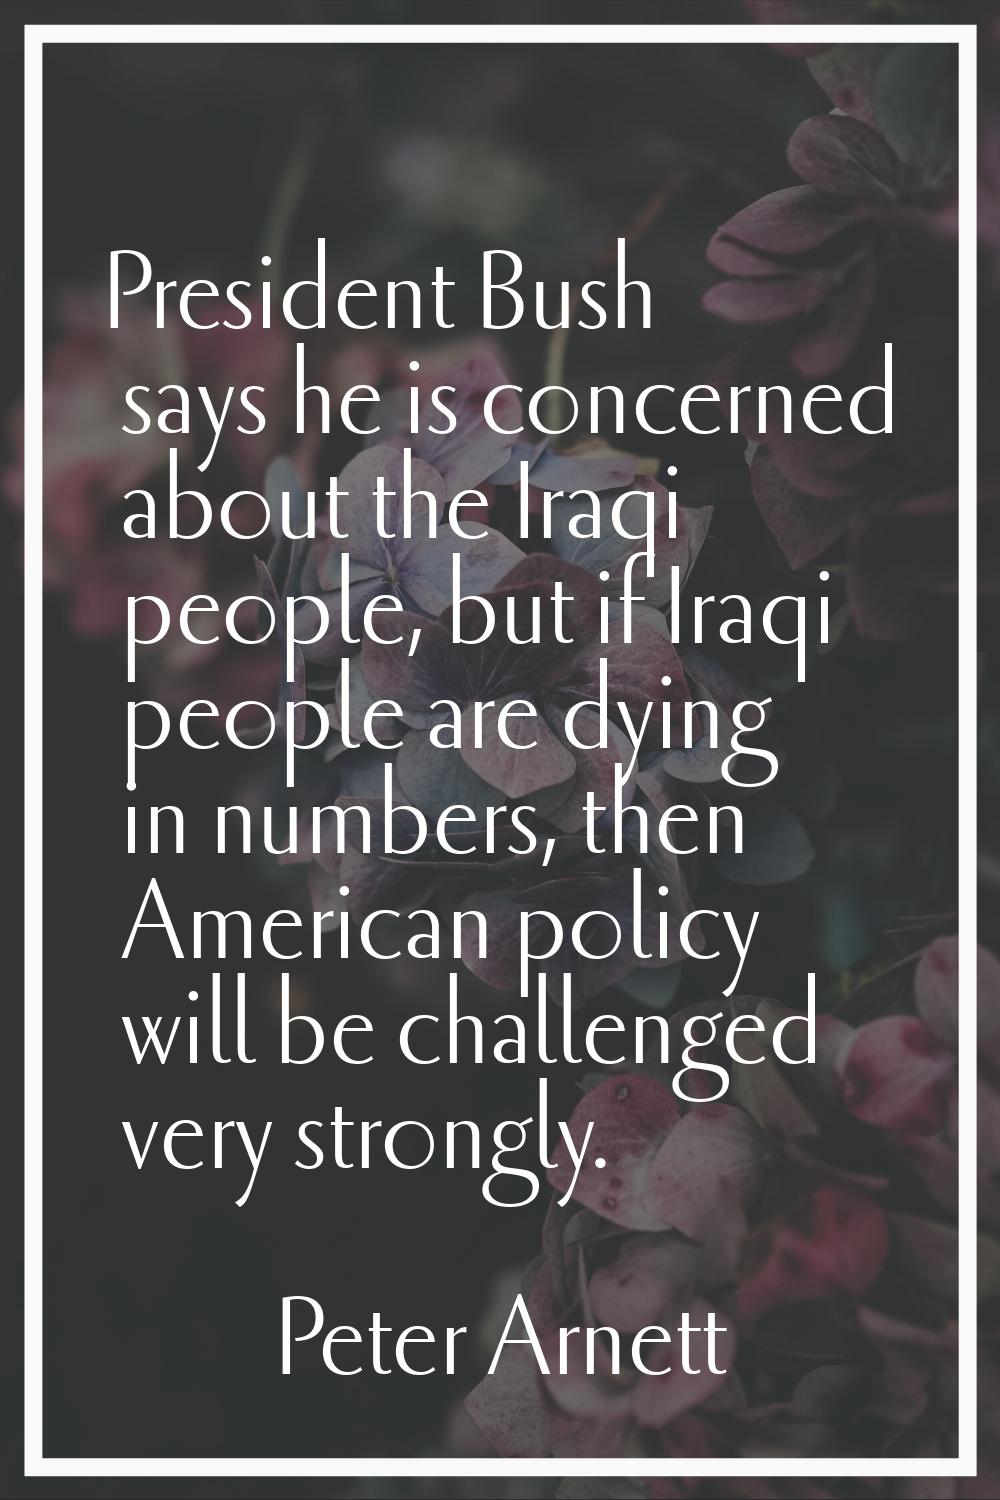 President Bush says he is concerned about the Iraqi people, but if Iraqi people are dying in number